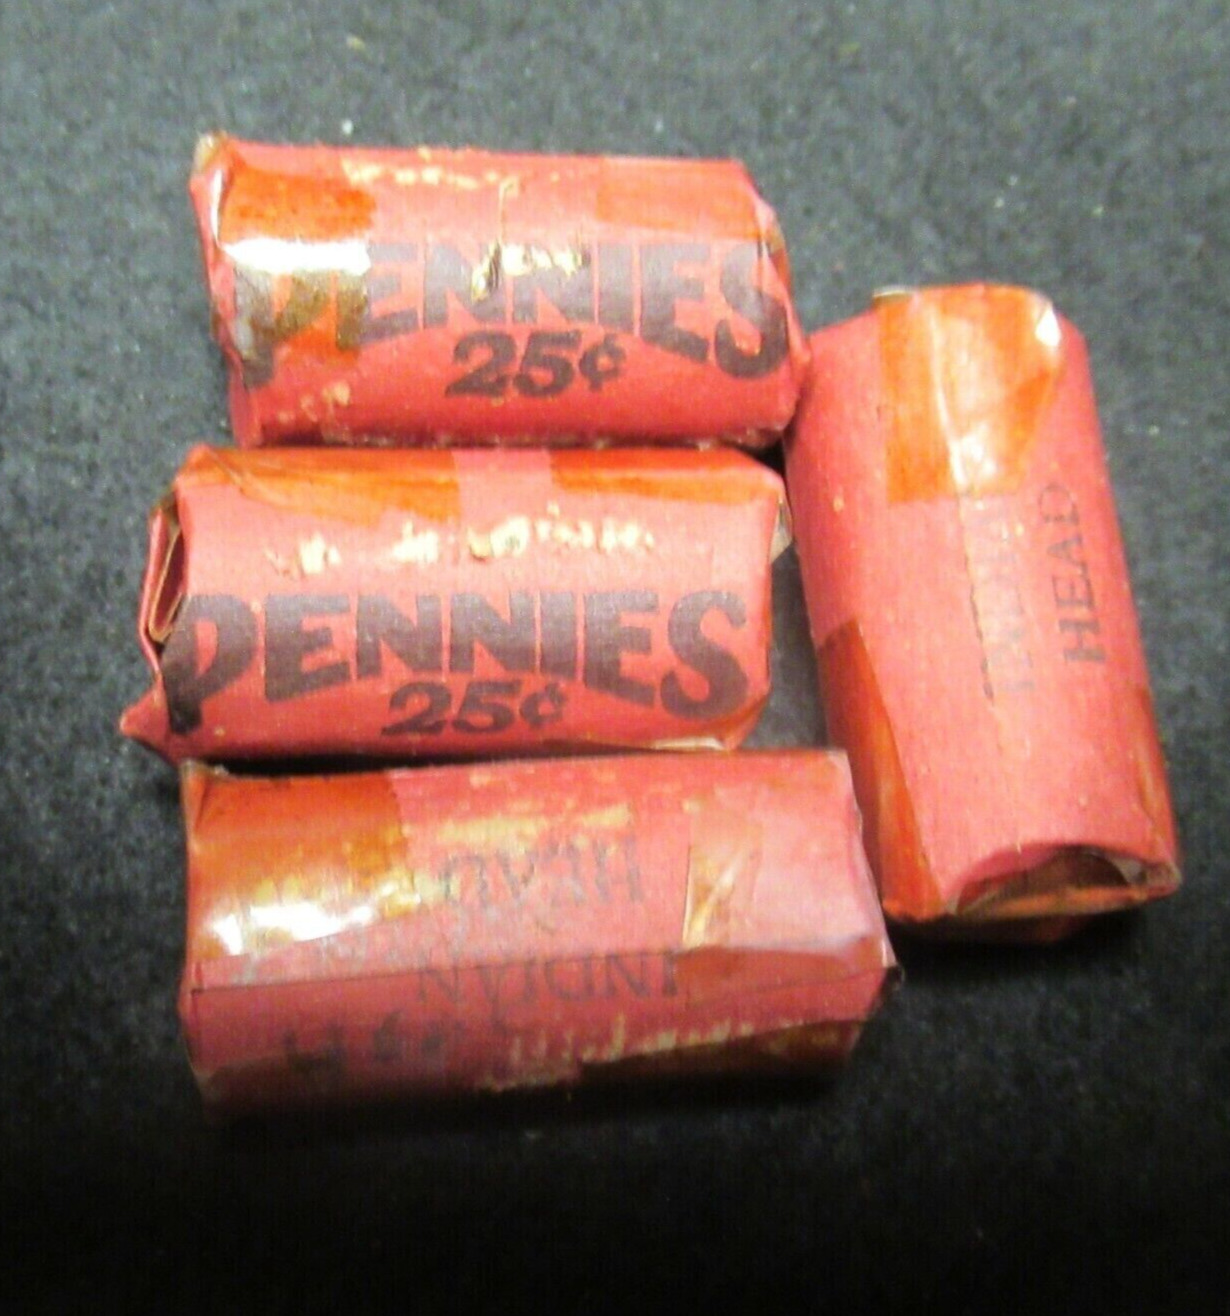 VERY OLD VINTAGE INDIAN HEAD PENNY HALF ROLL/LOT SEALING TAPE IS YELLOW FROM AGE